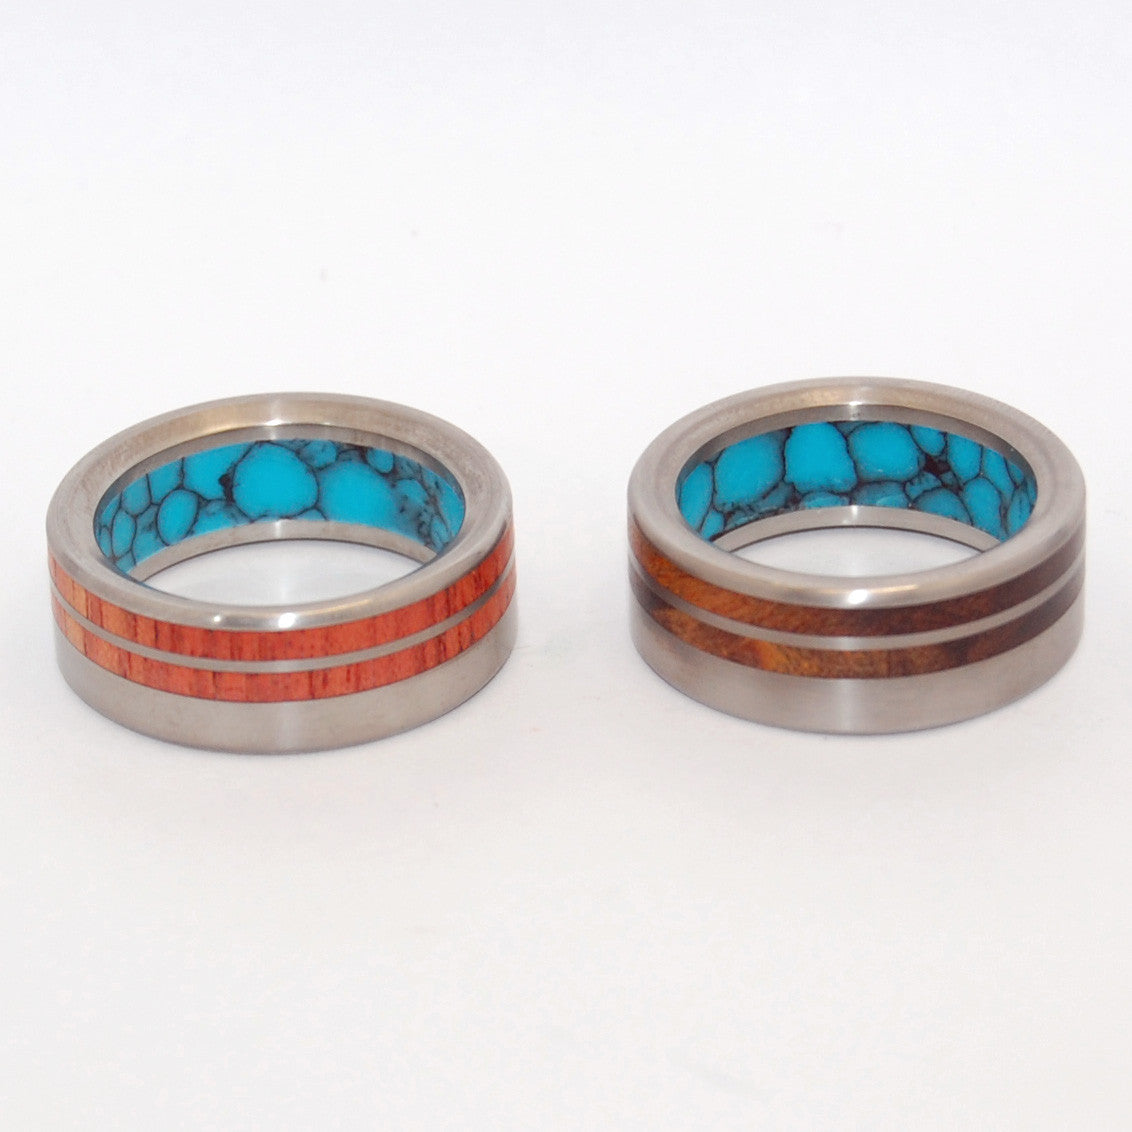 MEANT TO BE | Tulip Wood, Ironwood, Turquoise & Titanium - Unique Wedding Rings Set - Minter and Richter Designs